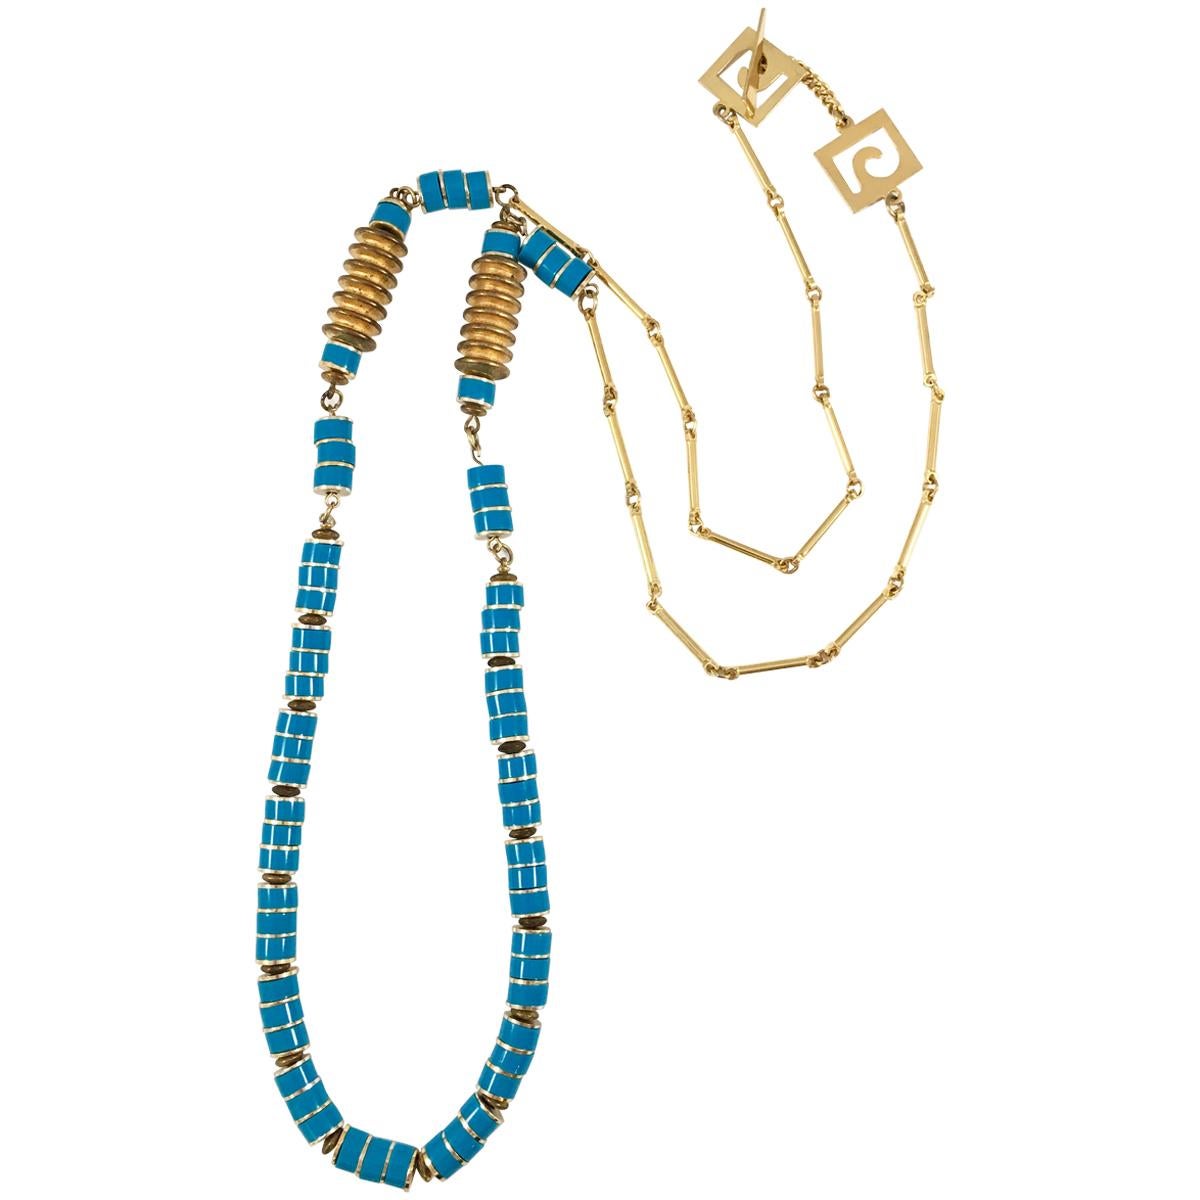 Pierre Cardin Turquoise Colored Beaded Necklace, 1970s